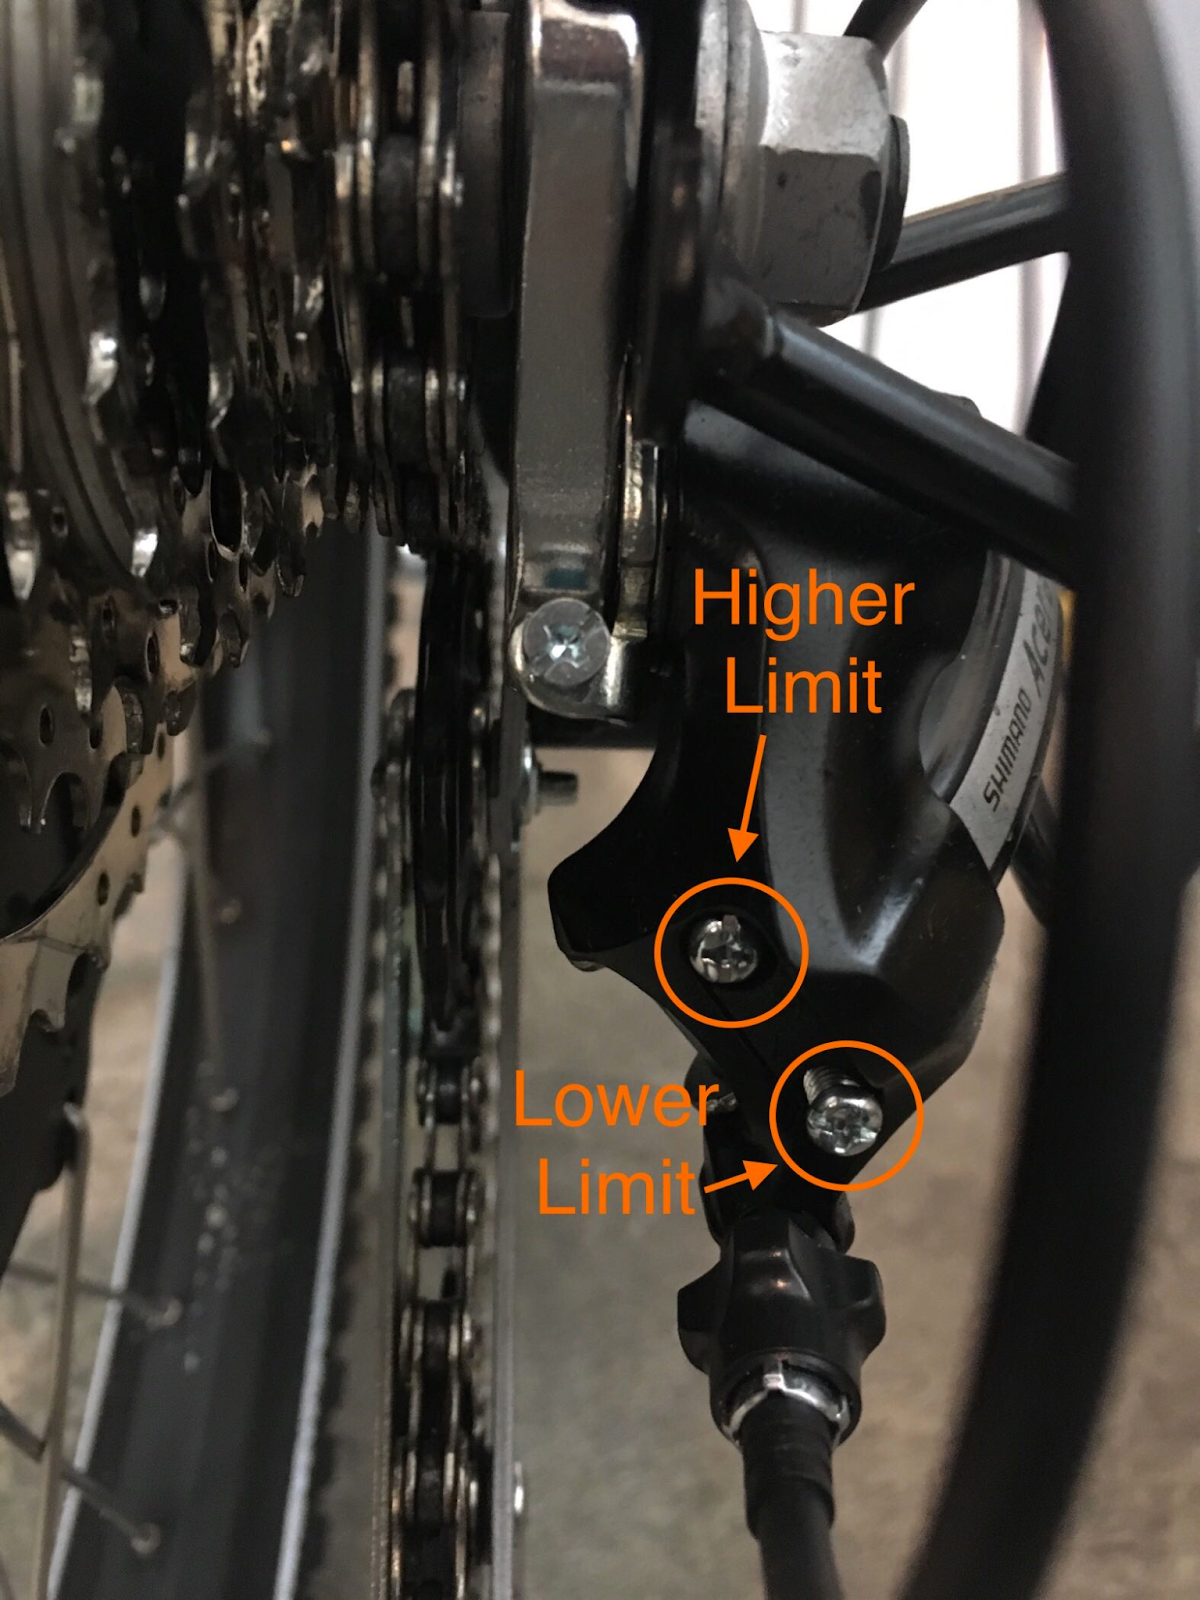 The various crews on the rear derailleur can be adjusted to tighten or loosen the mountain bike chain tension to make gear changing easier and smoother.